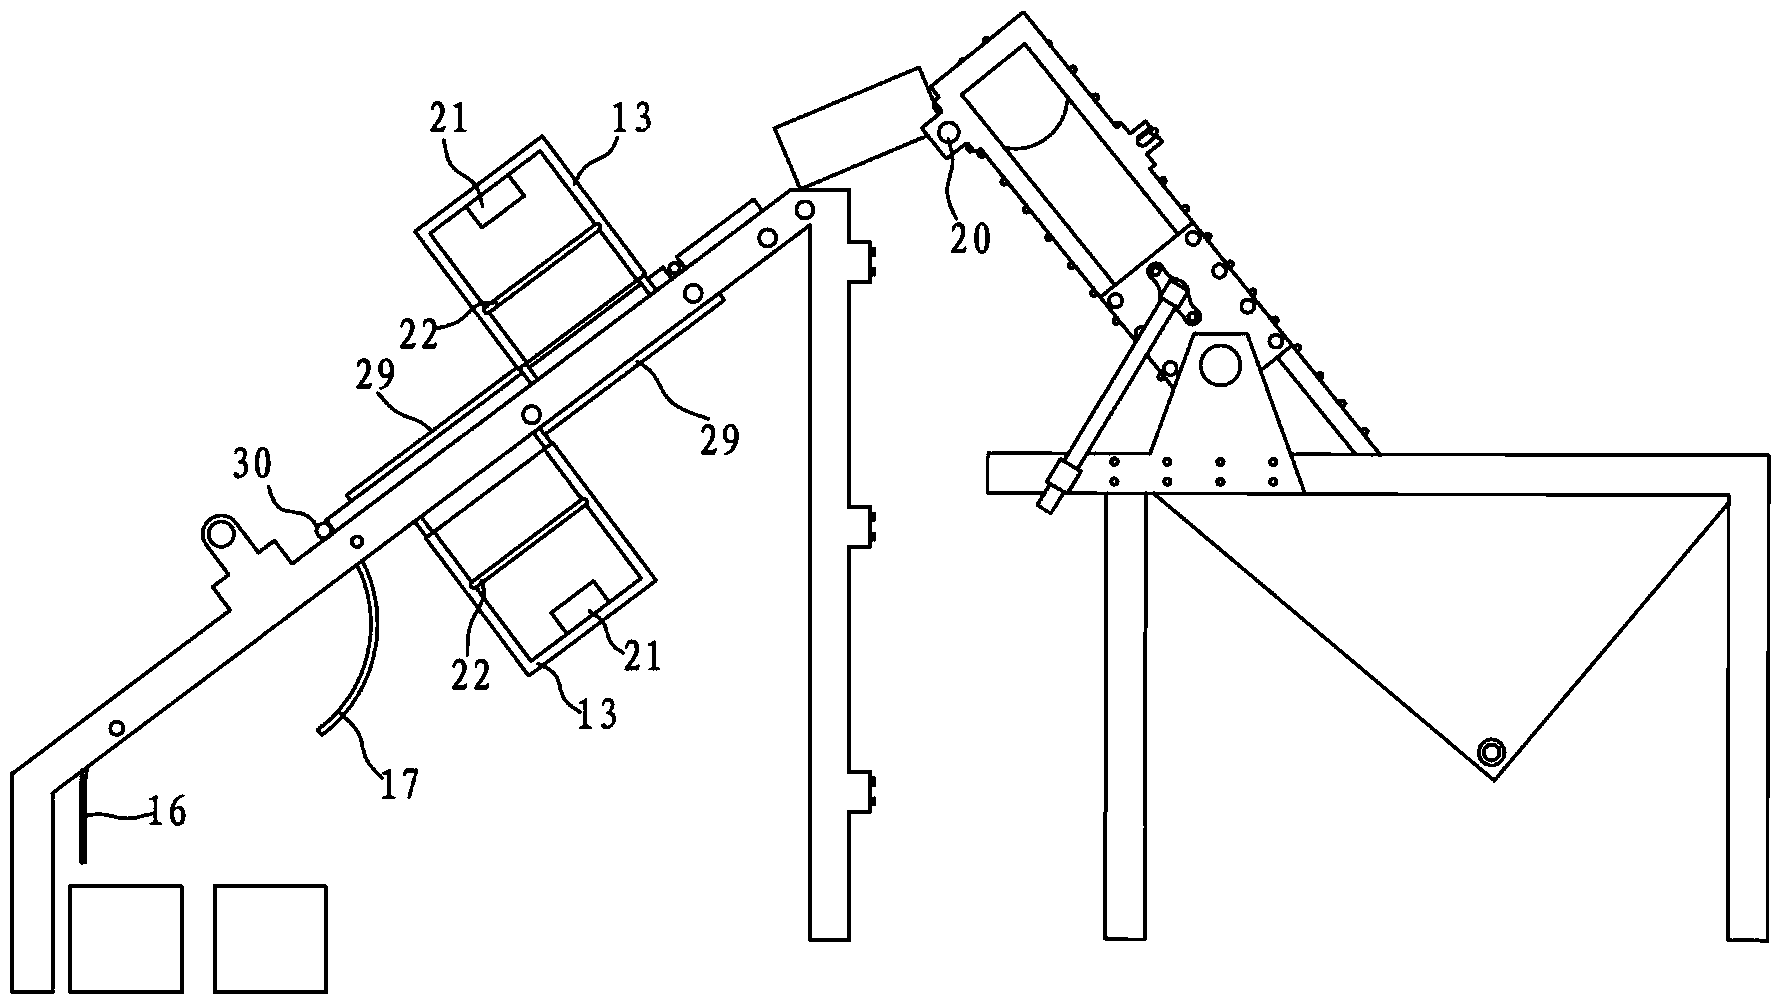 Method and device for automatically carefully sorting and grading shrimps